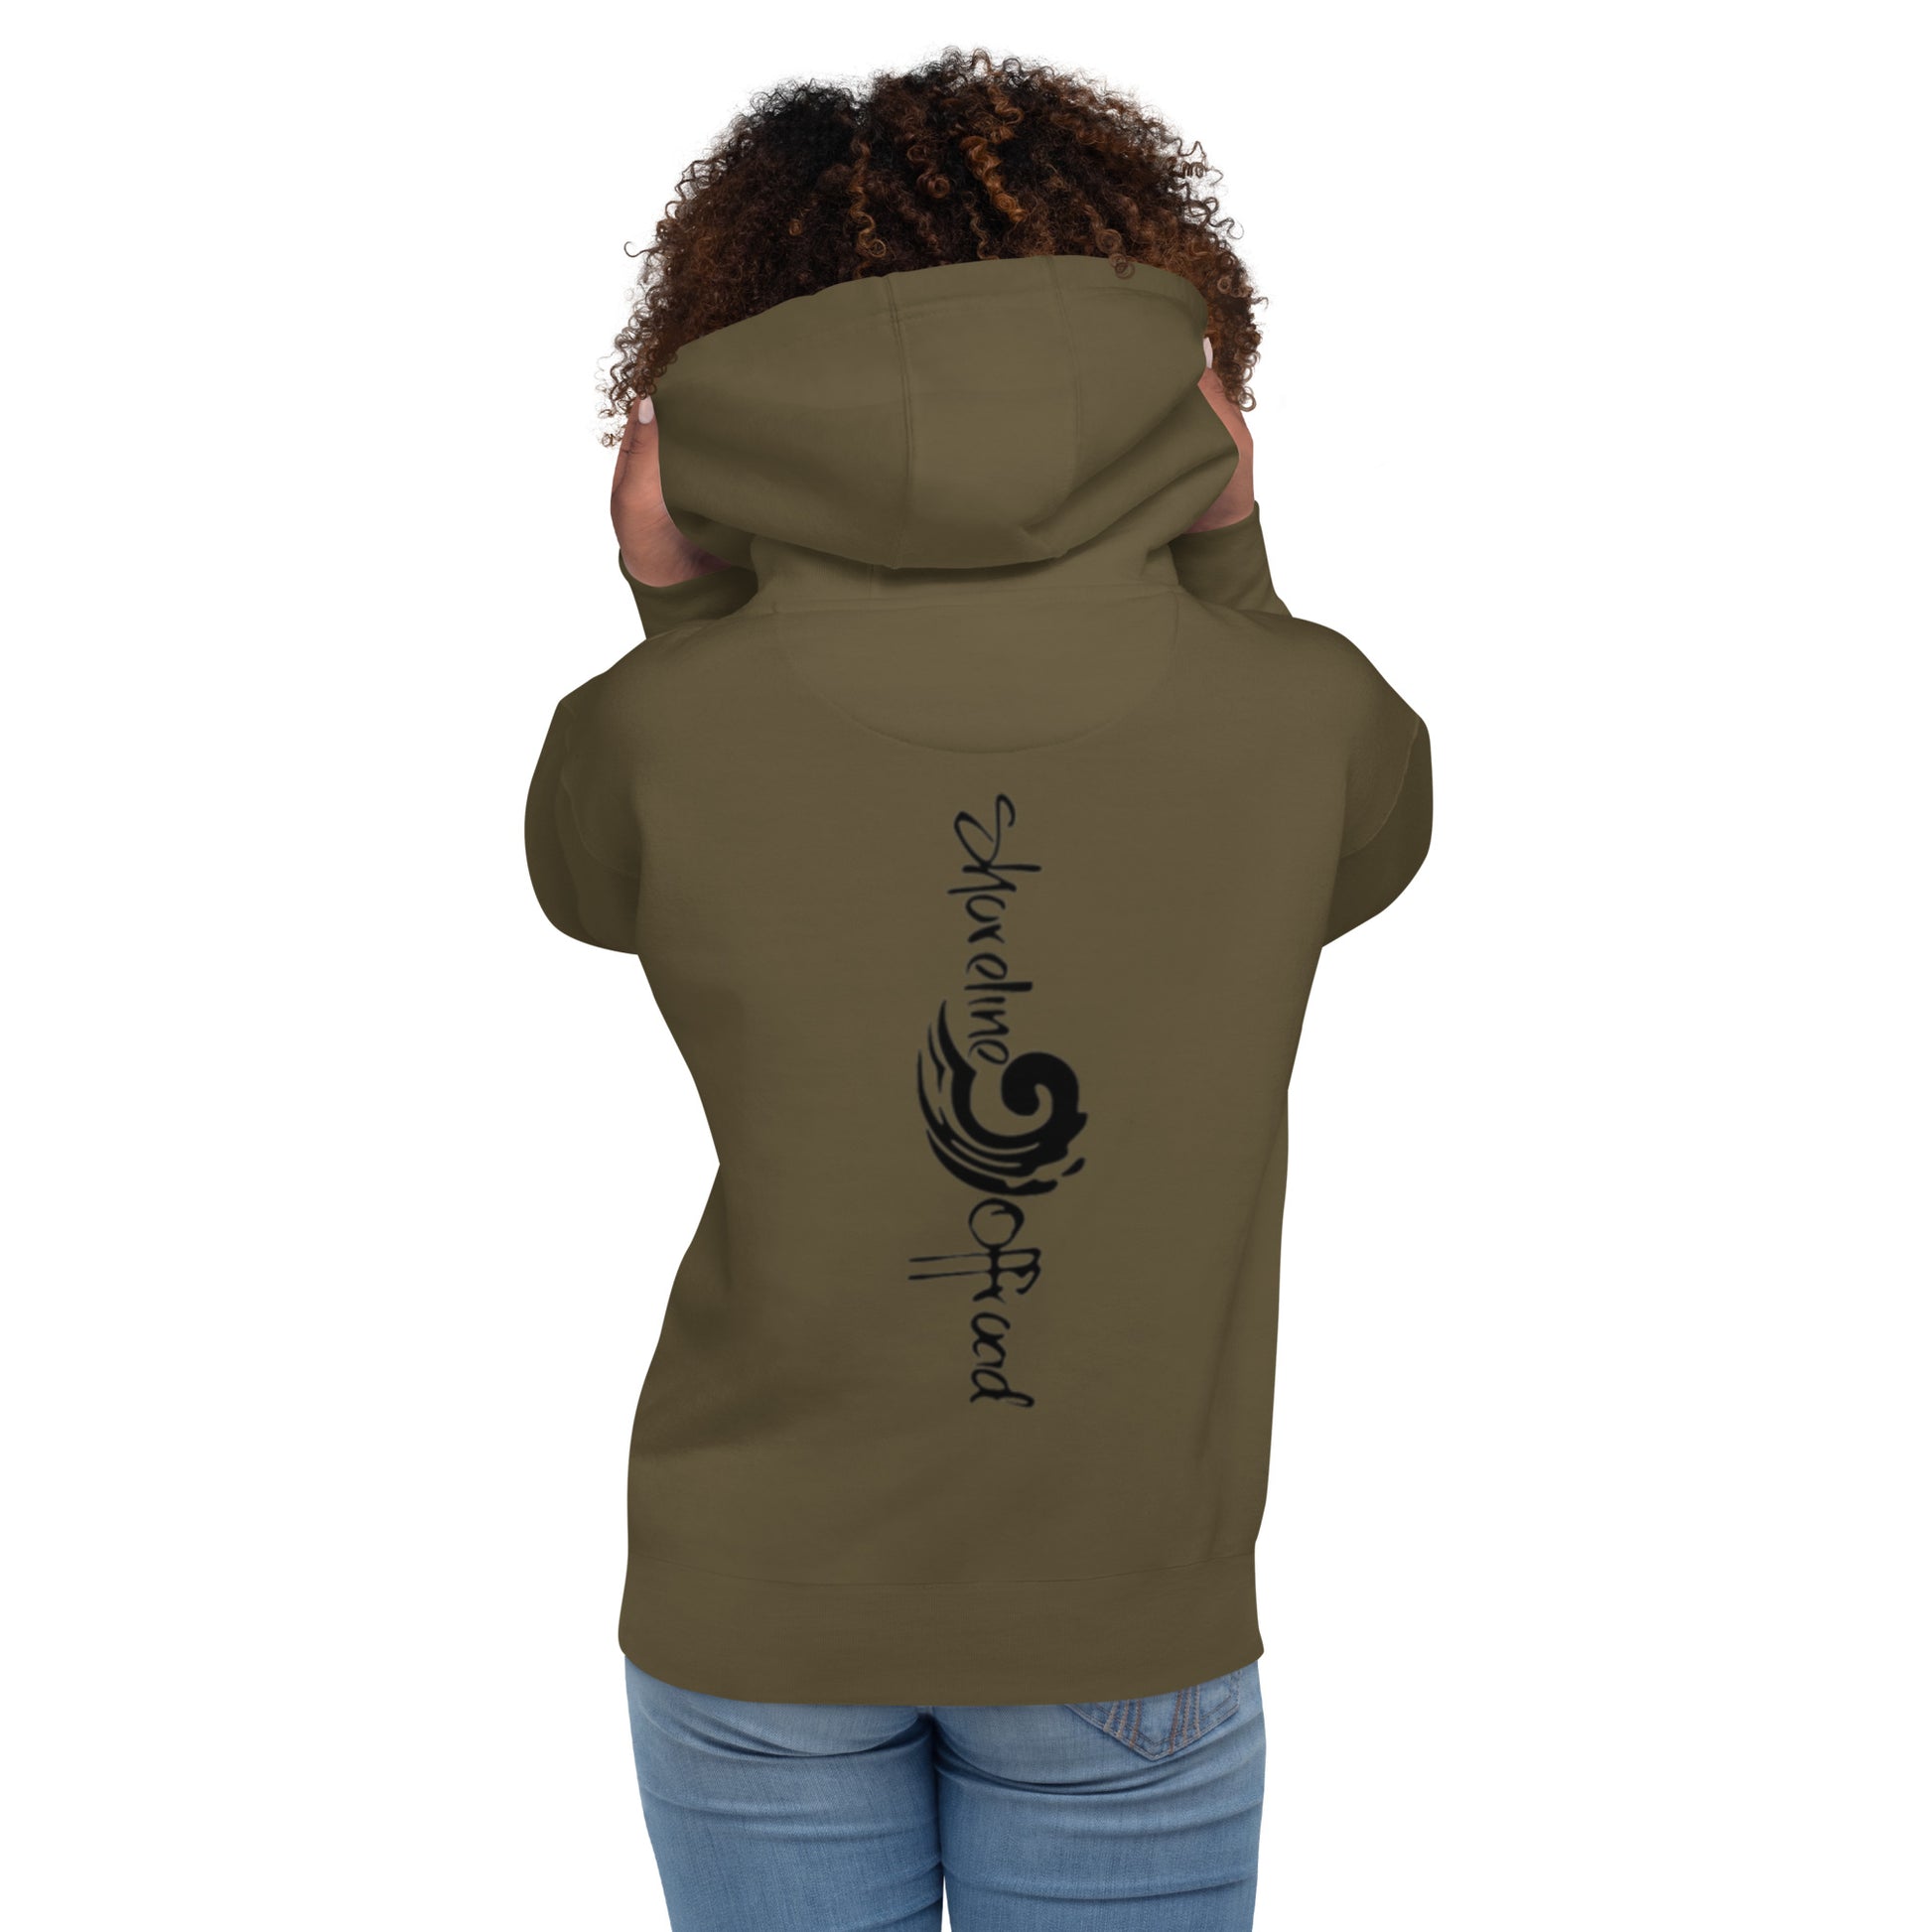 a woman wearing a brown hoodie with a black design on it